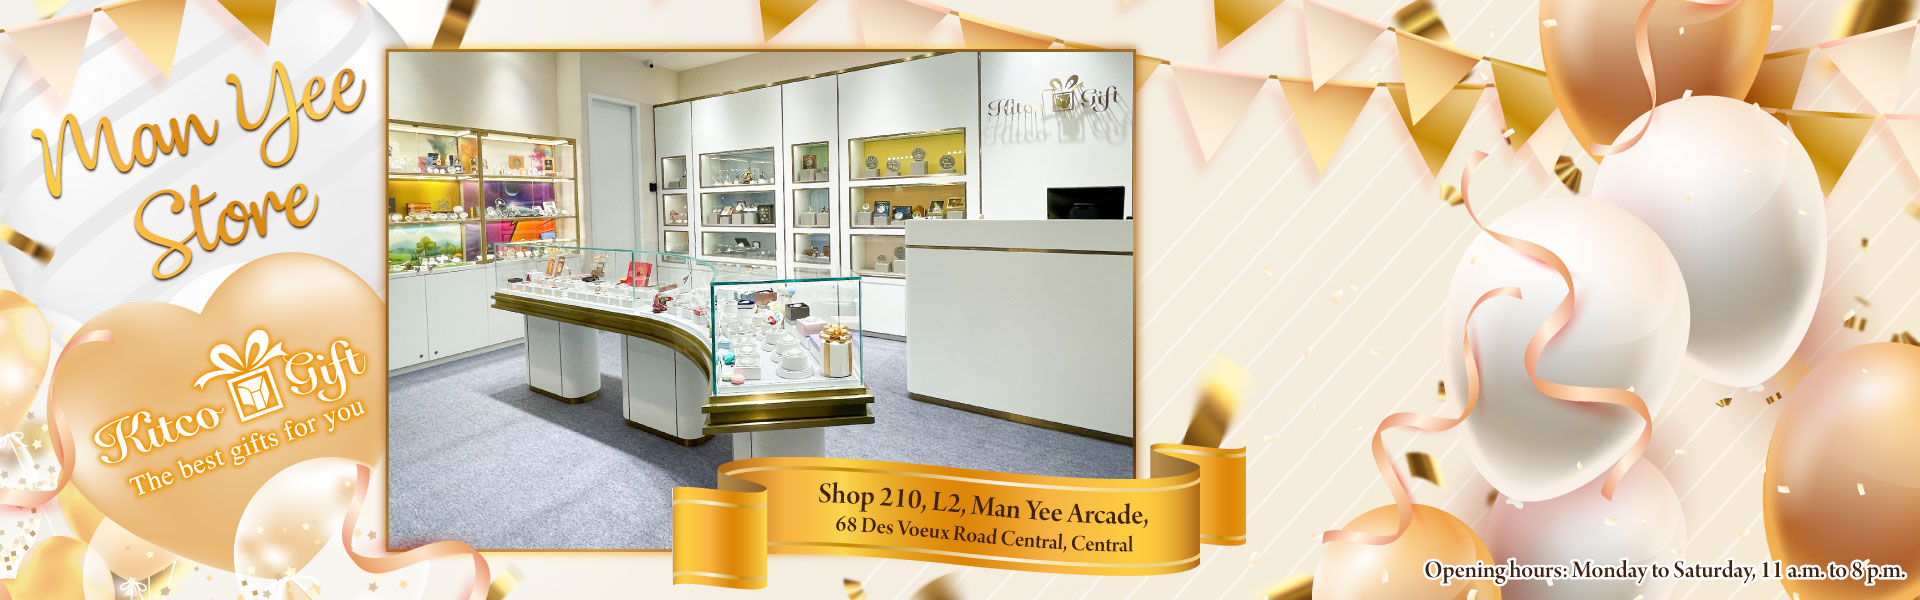 OUR NEWLY EXPANDED GIFT STORE